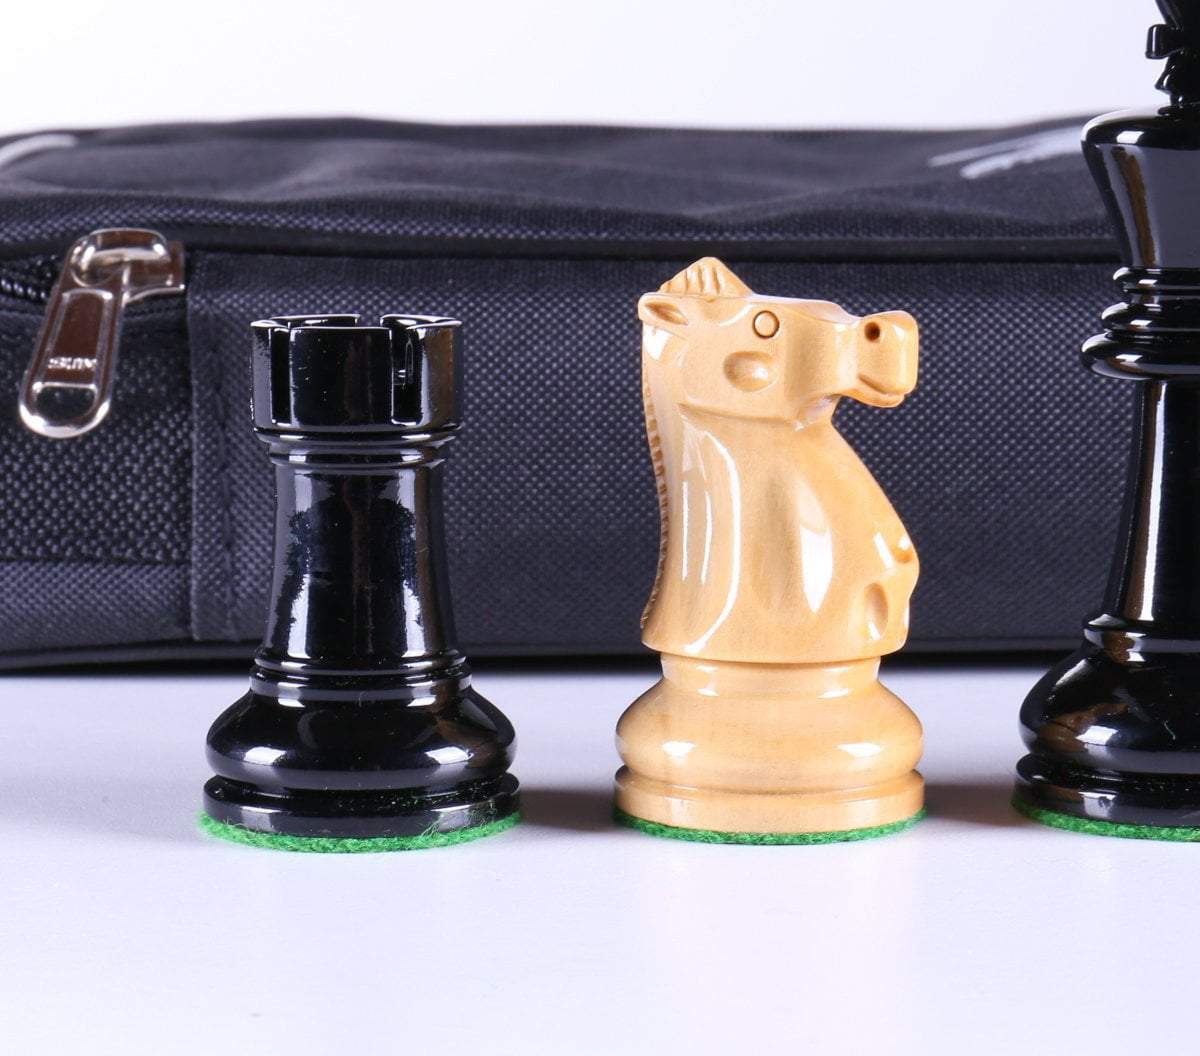 SINGLE REPLACEMENT PIECES: 3 5/8" Ultimate Style Wooden Chess Pieces - Ebonized Piece